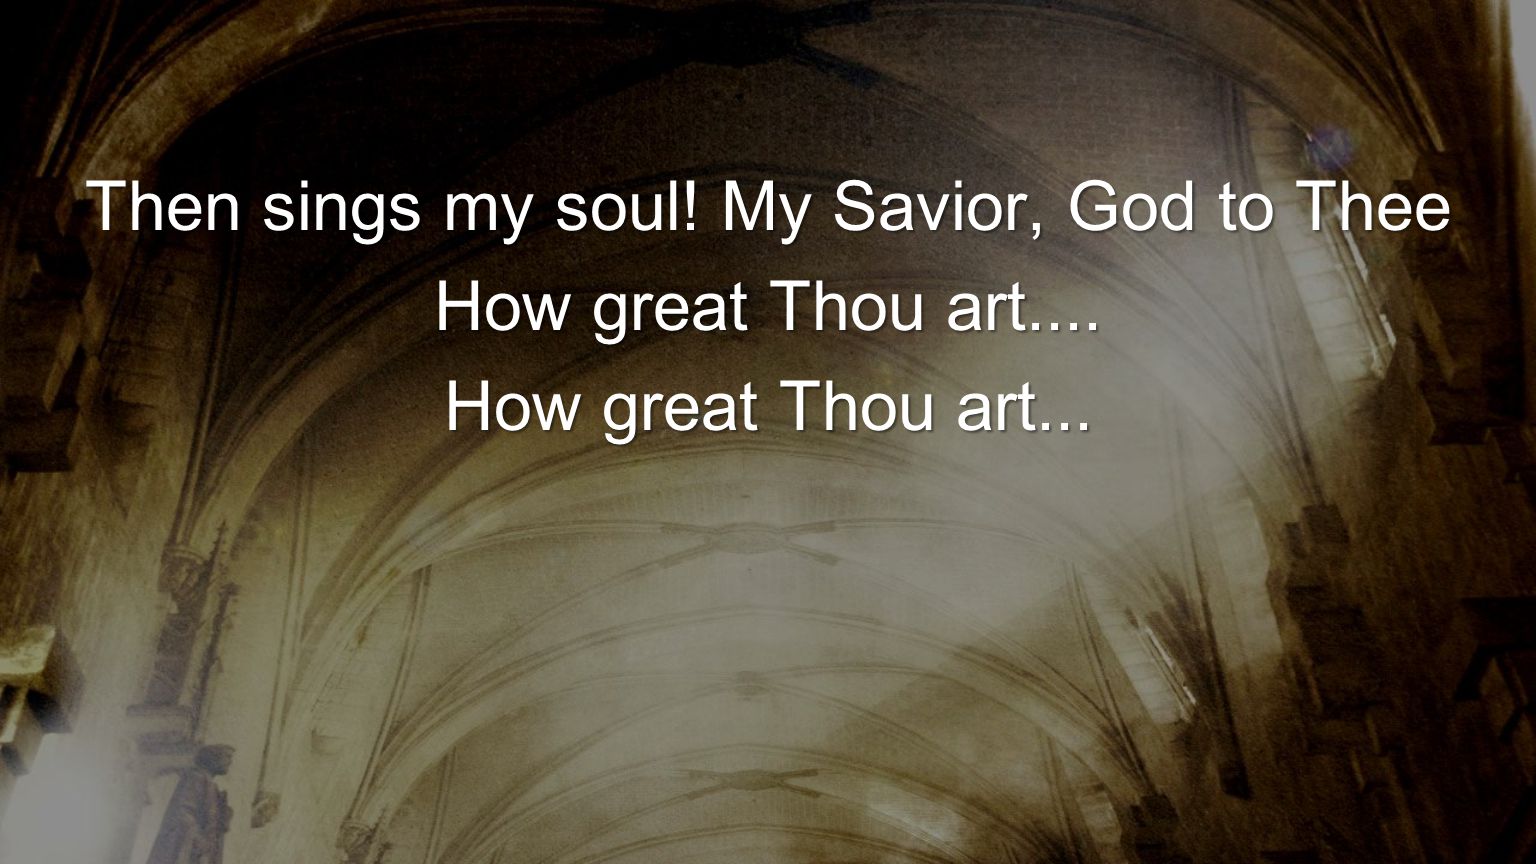 Then sings my soul! My Savior, God to Thee